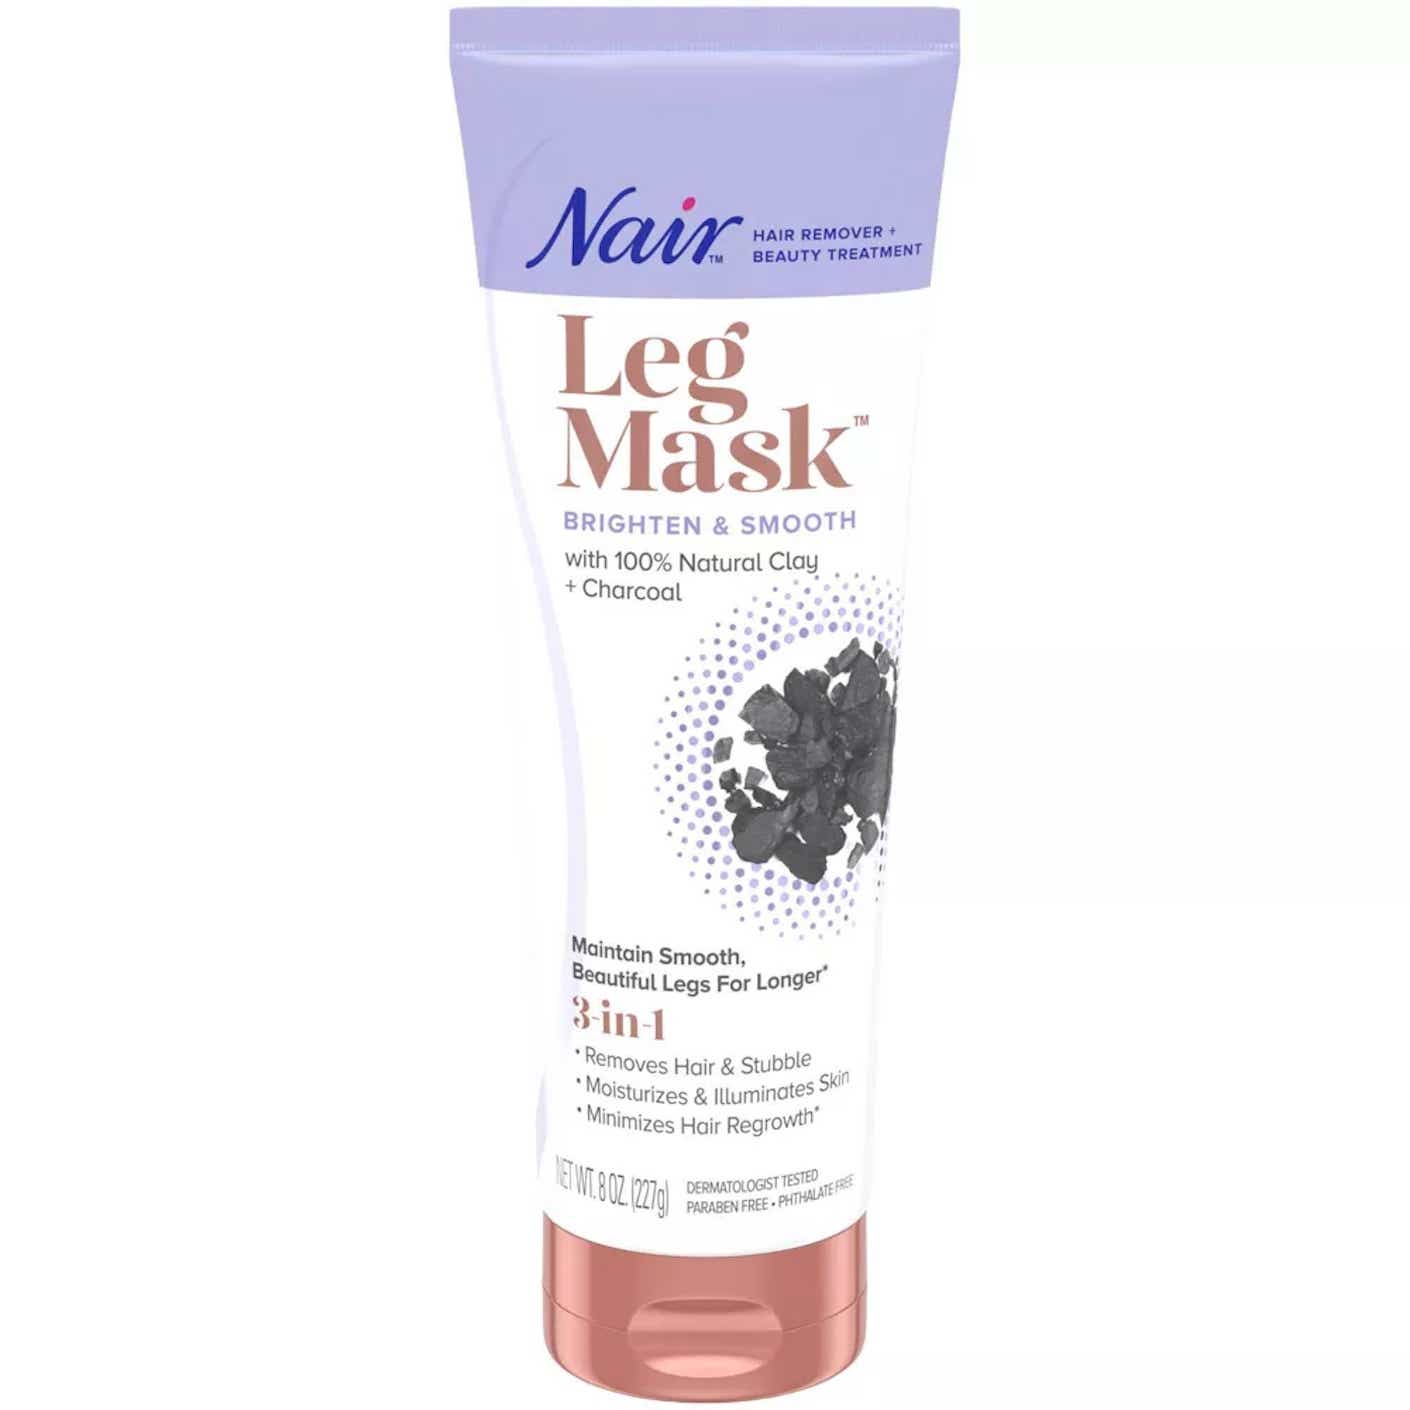 A plastic tube of Nair brand leg mask is pictured.